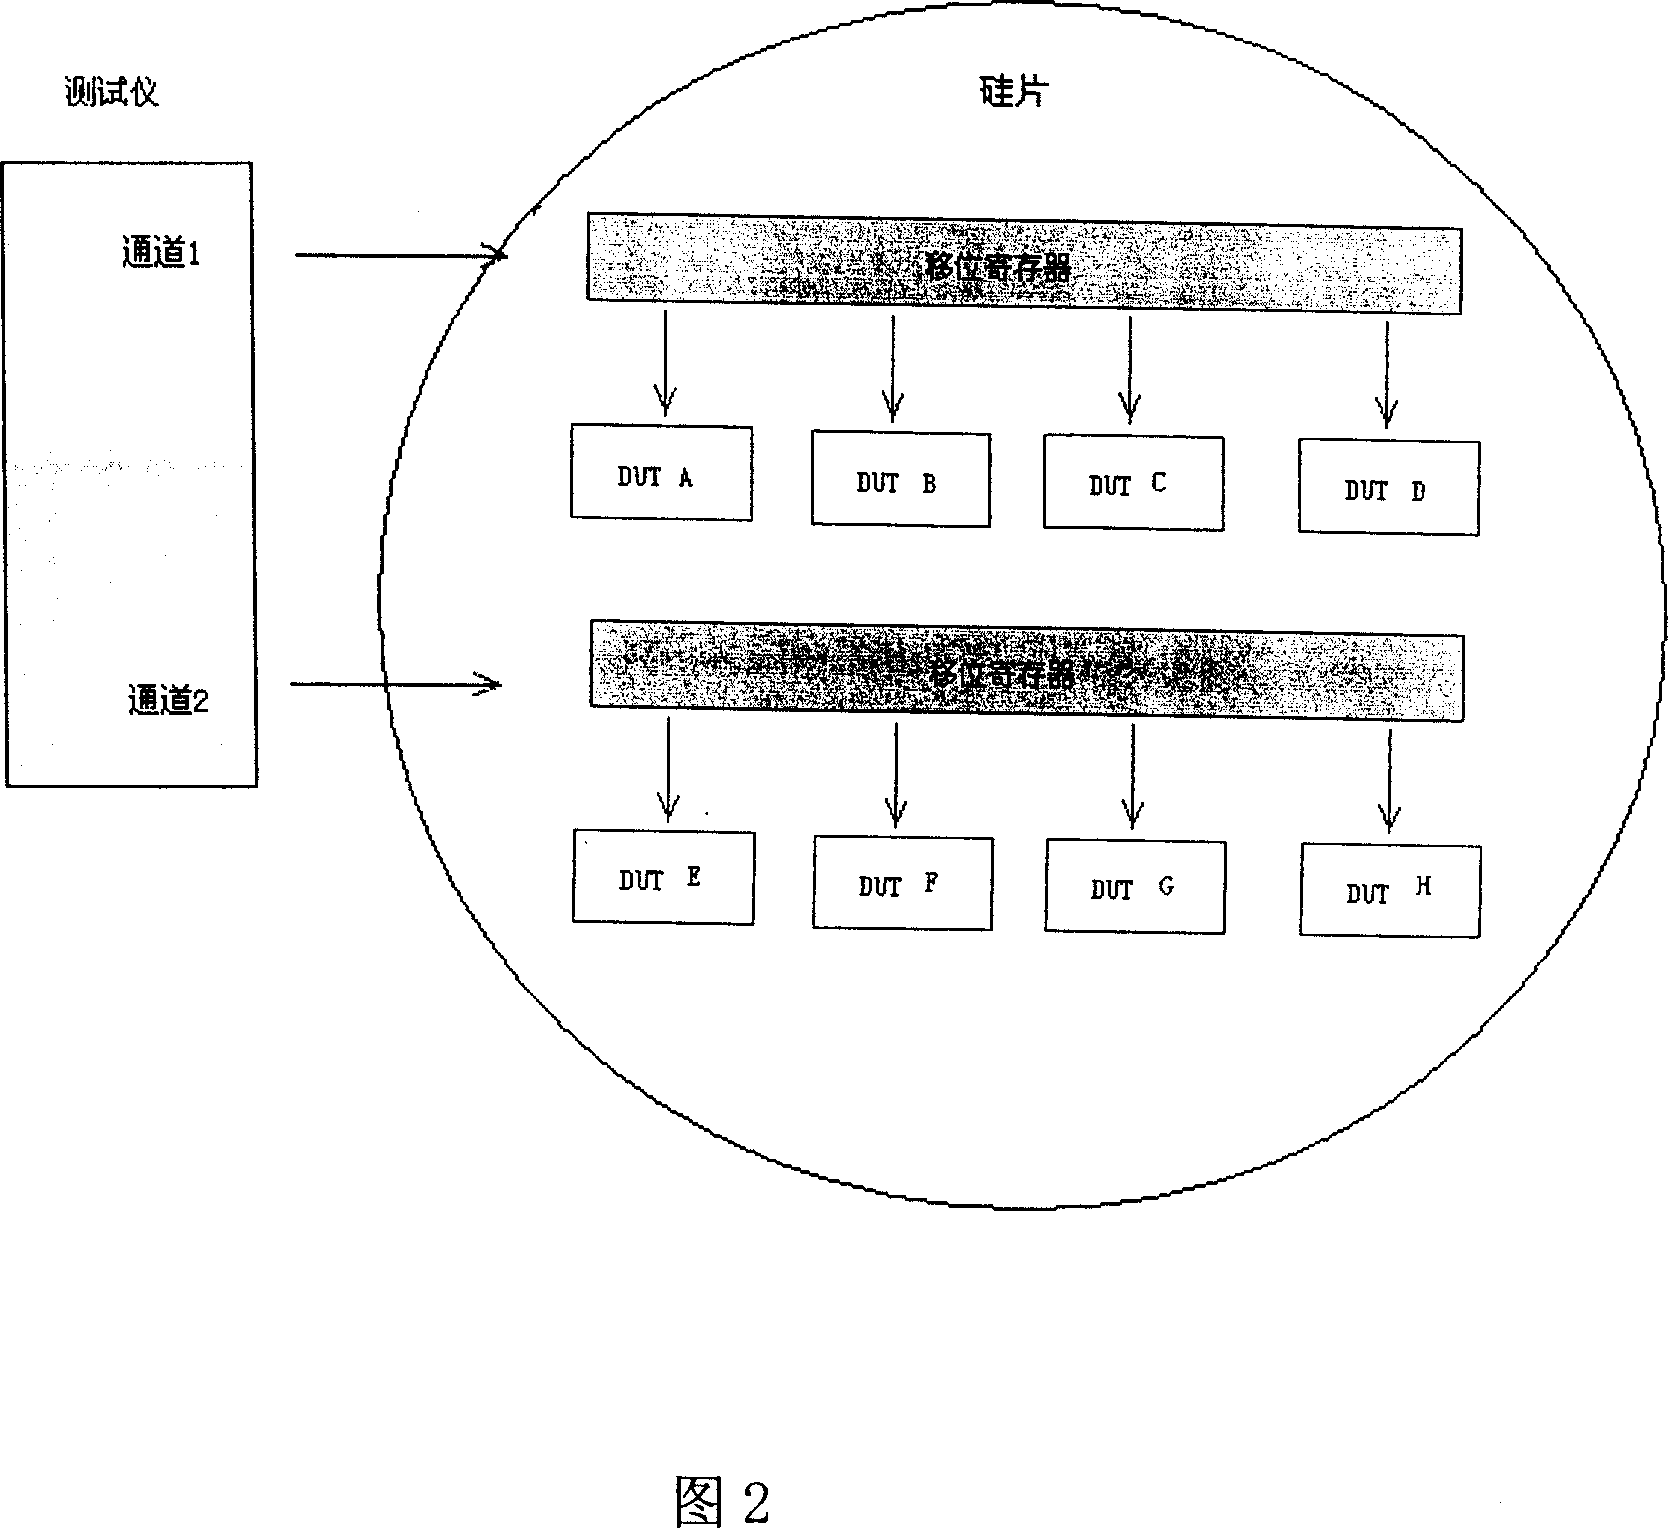 Method for parallelly detecting synchronous communication chips